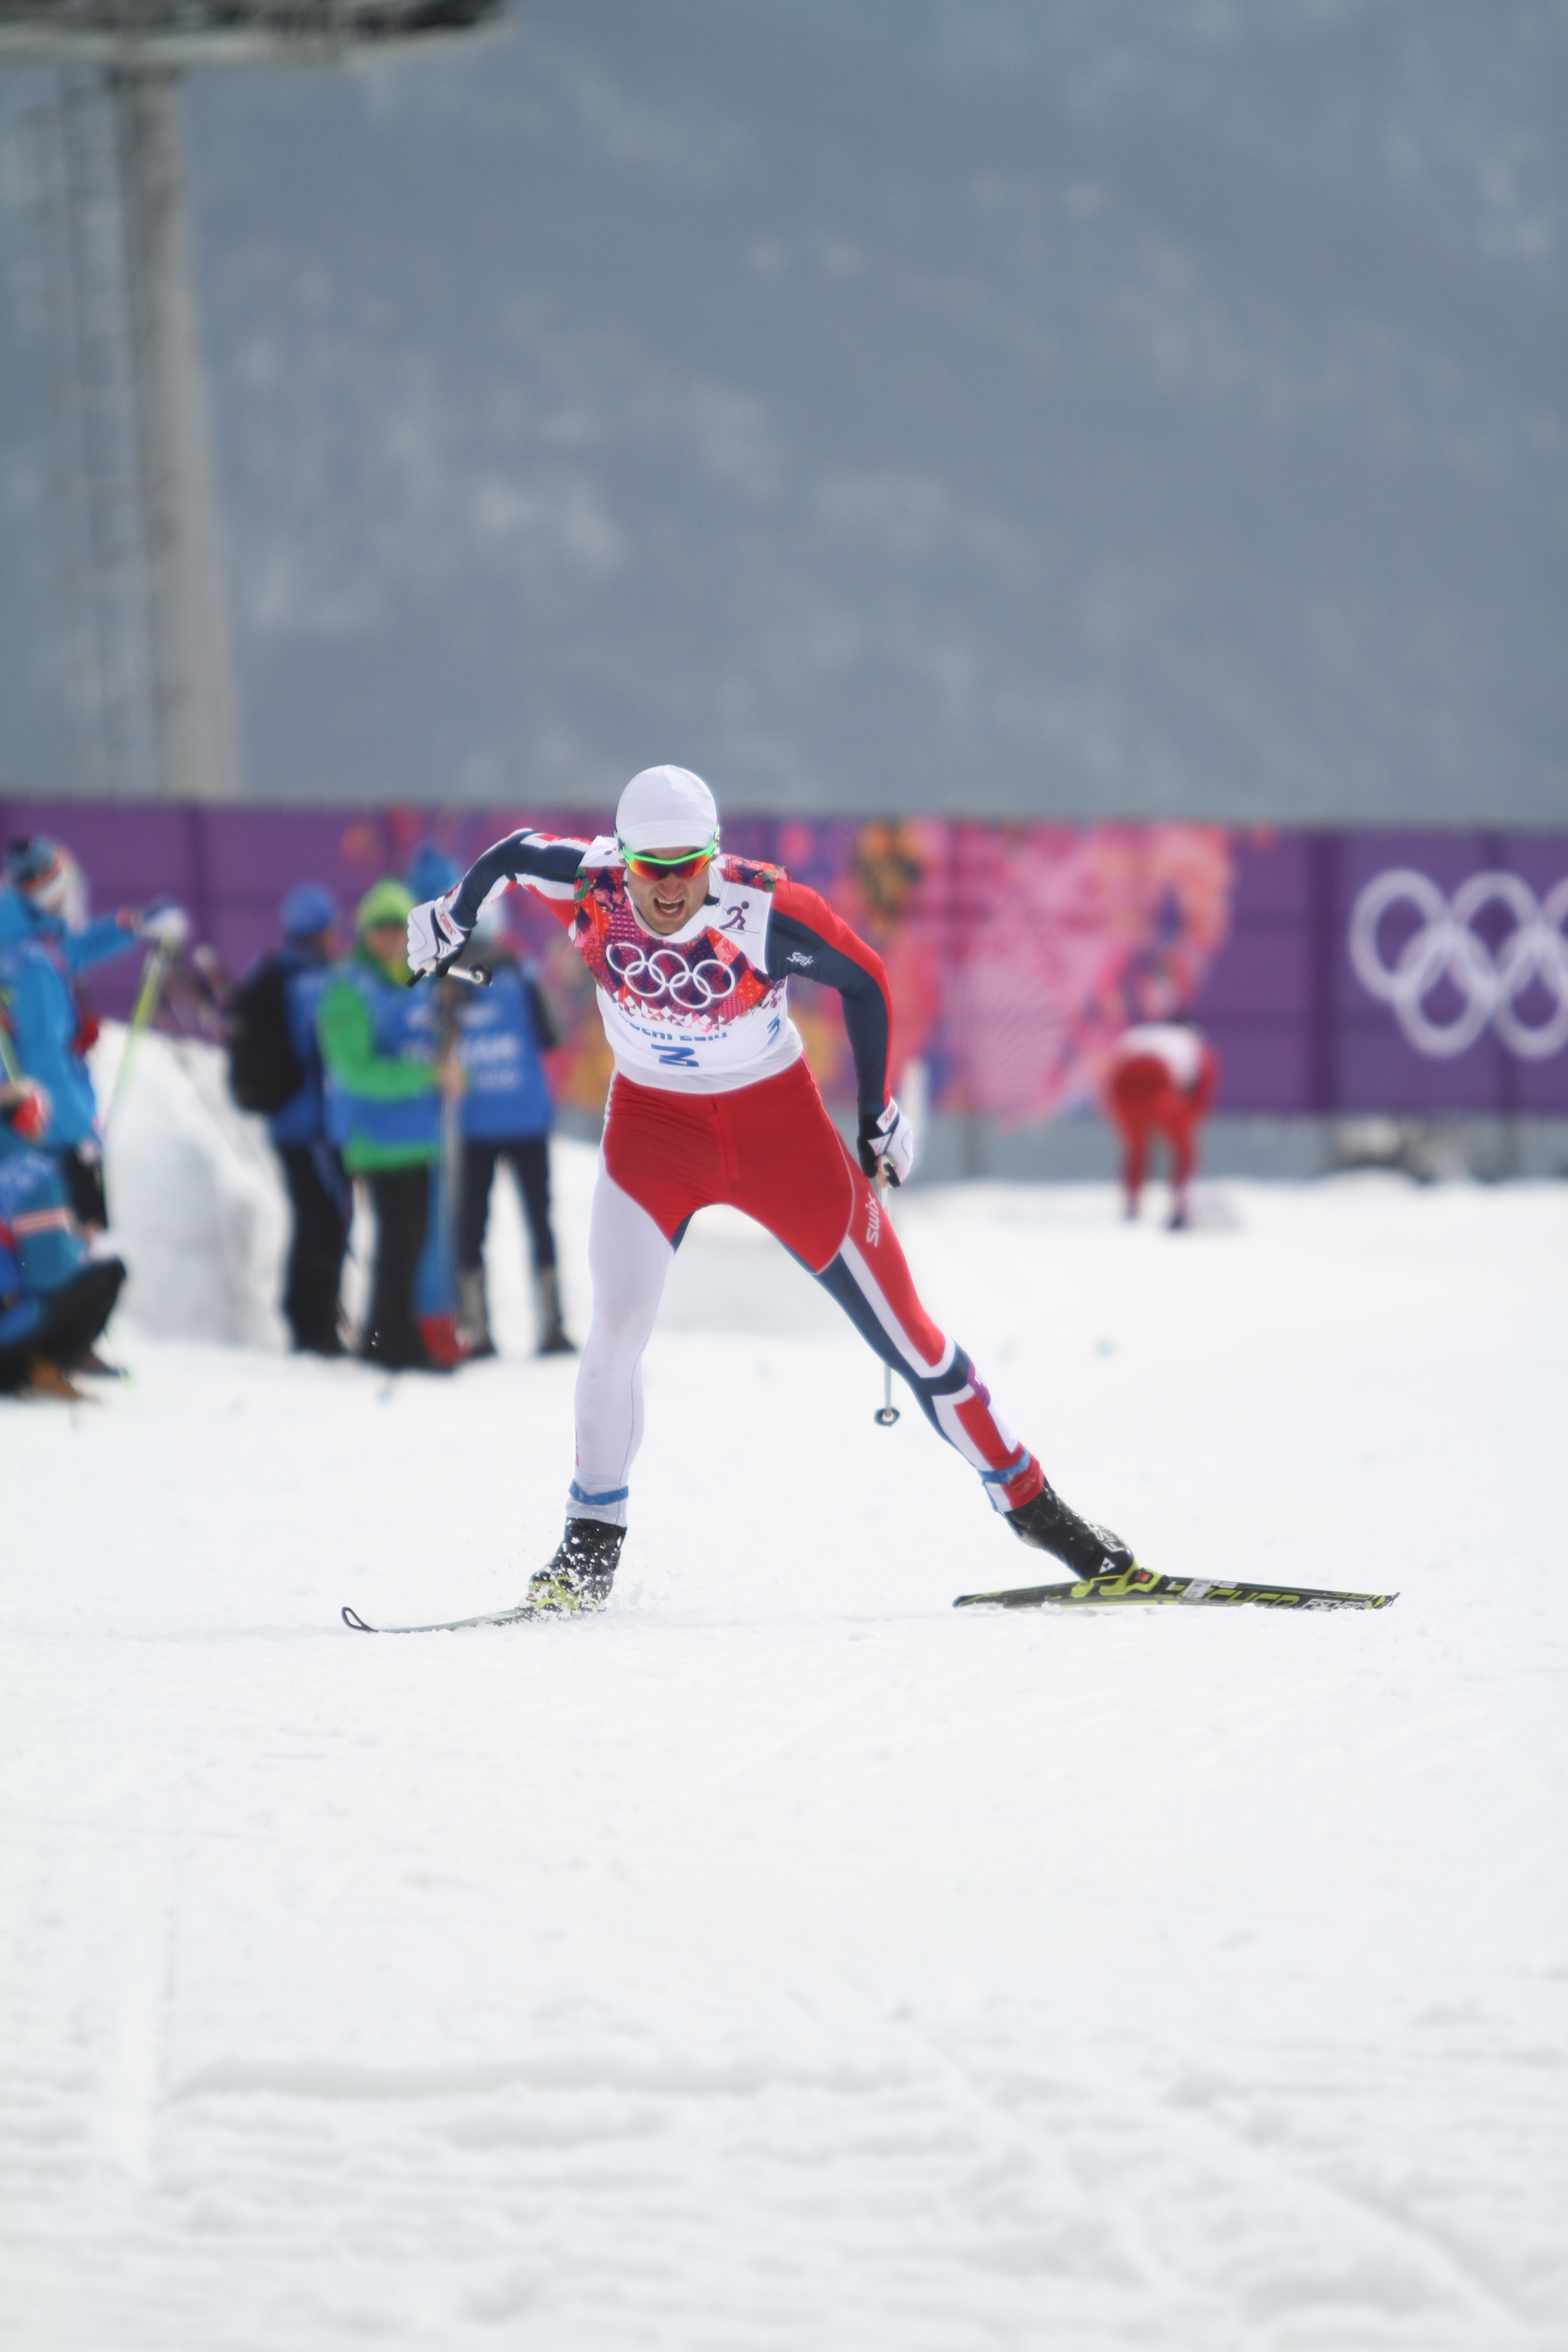 Northug and Other Top Distance Skiers Missing from Start List in Olympic 15 k